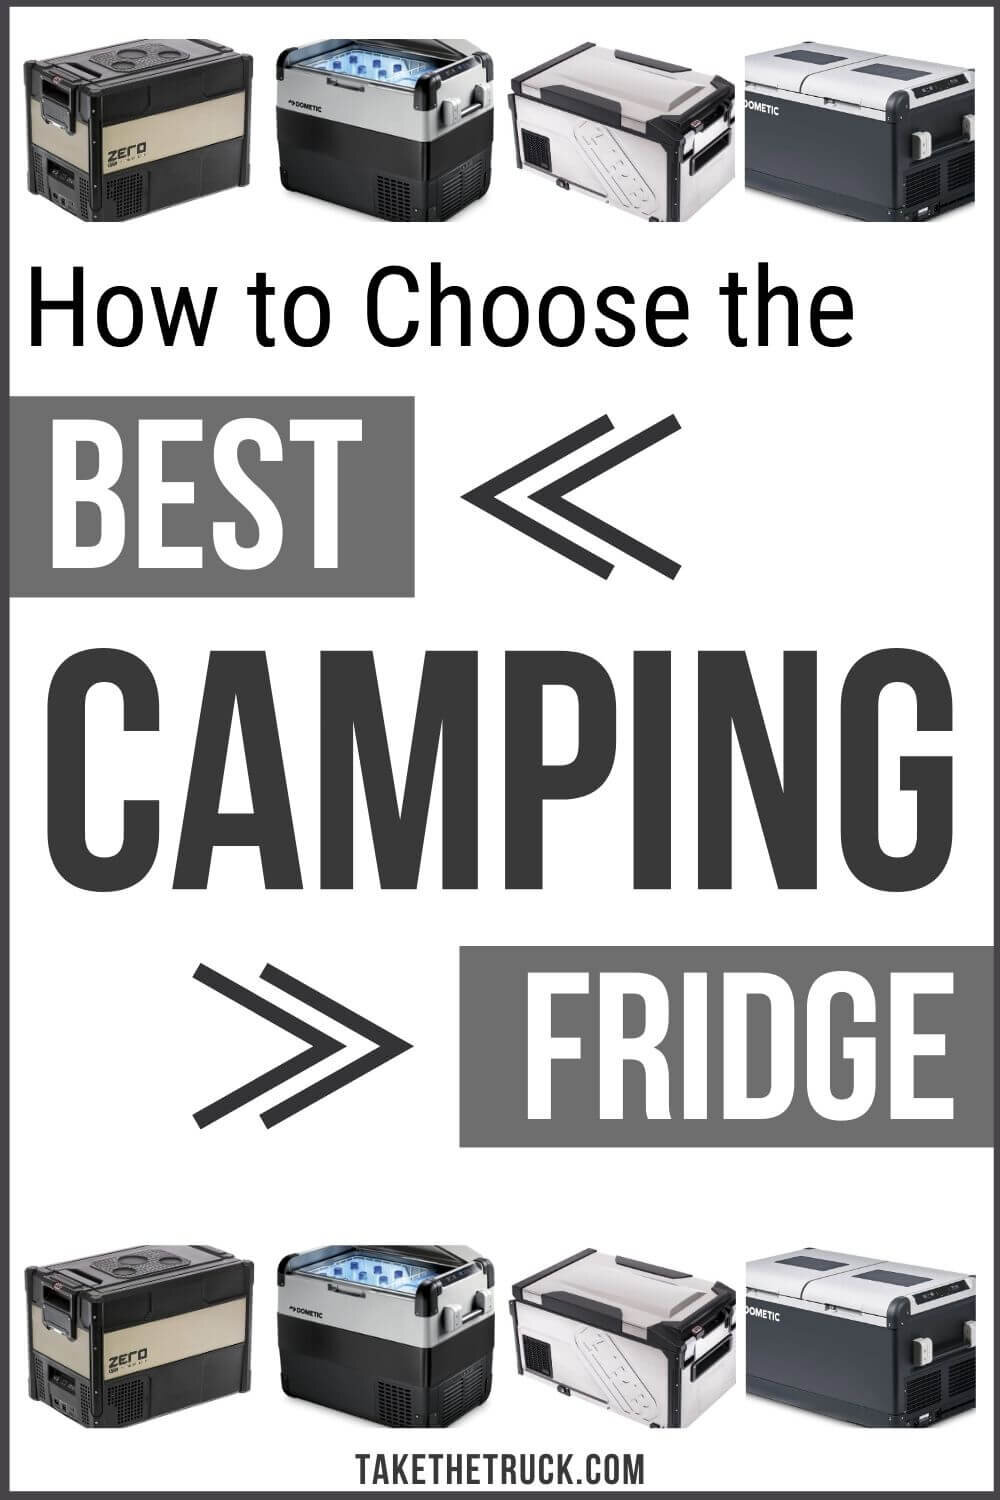 All you need to know before choosing the best camping fridge for your wants and needs! A portable fridge for camping is a huge upgrade from a cooler. Step by step tips on finding a camping fridge.